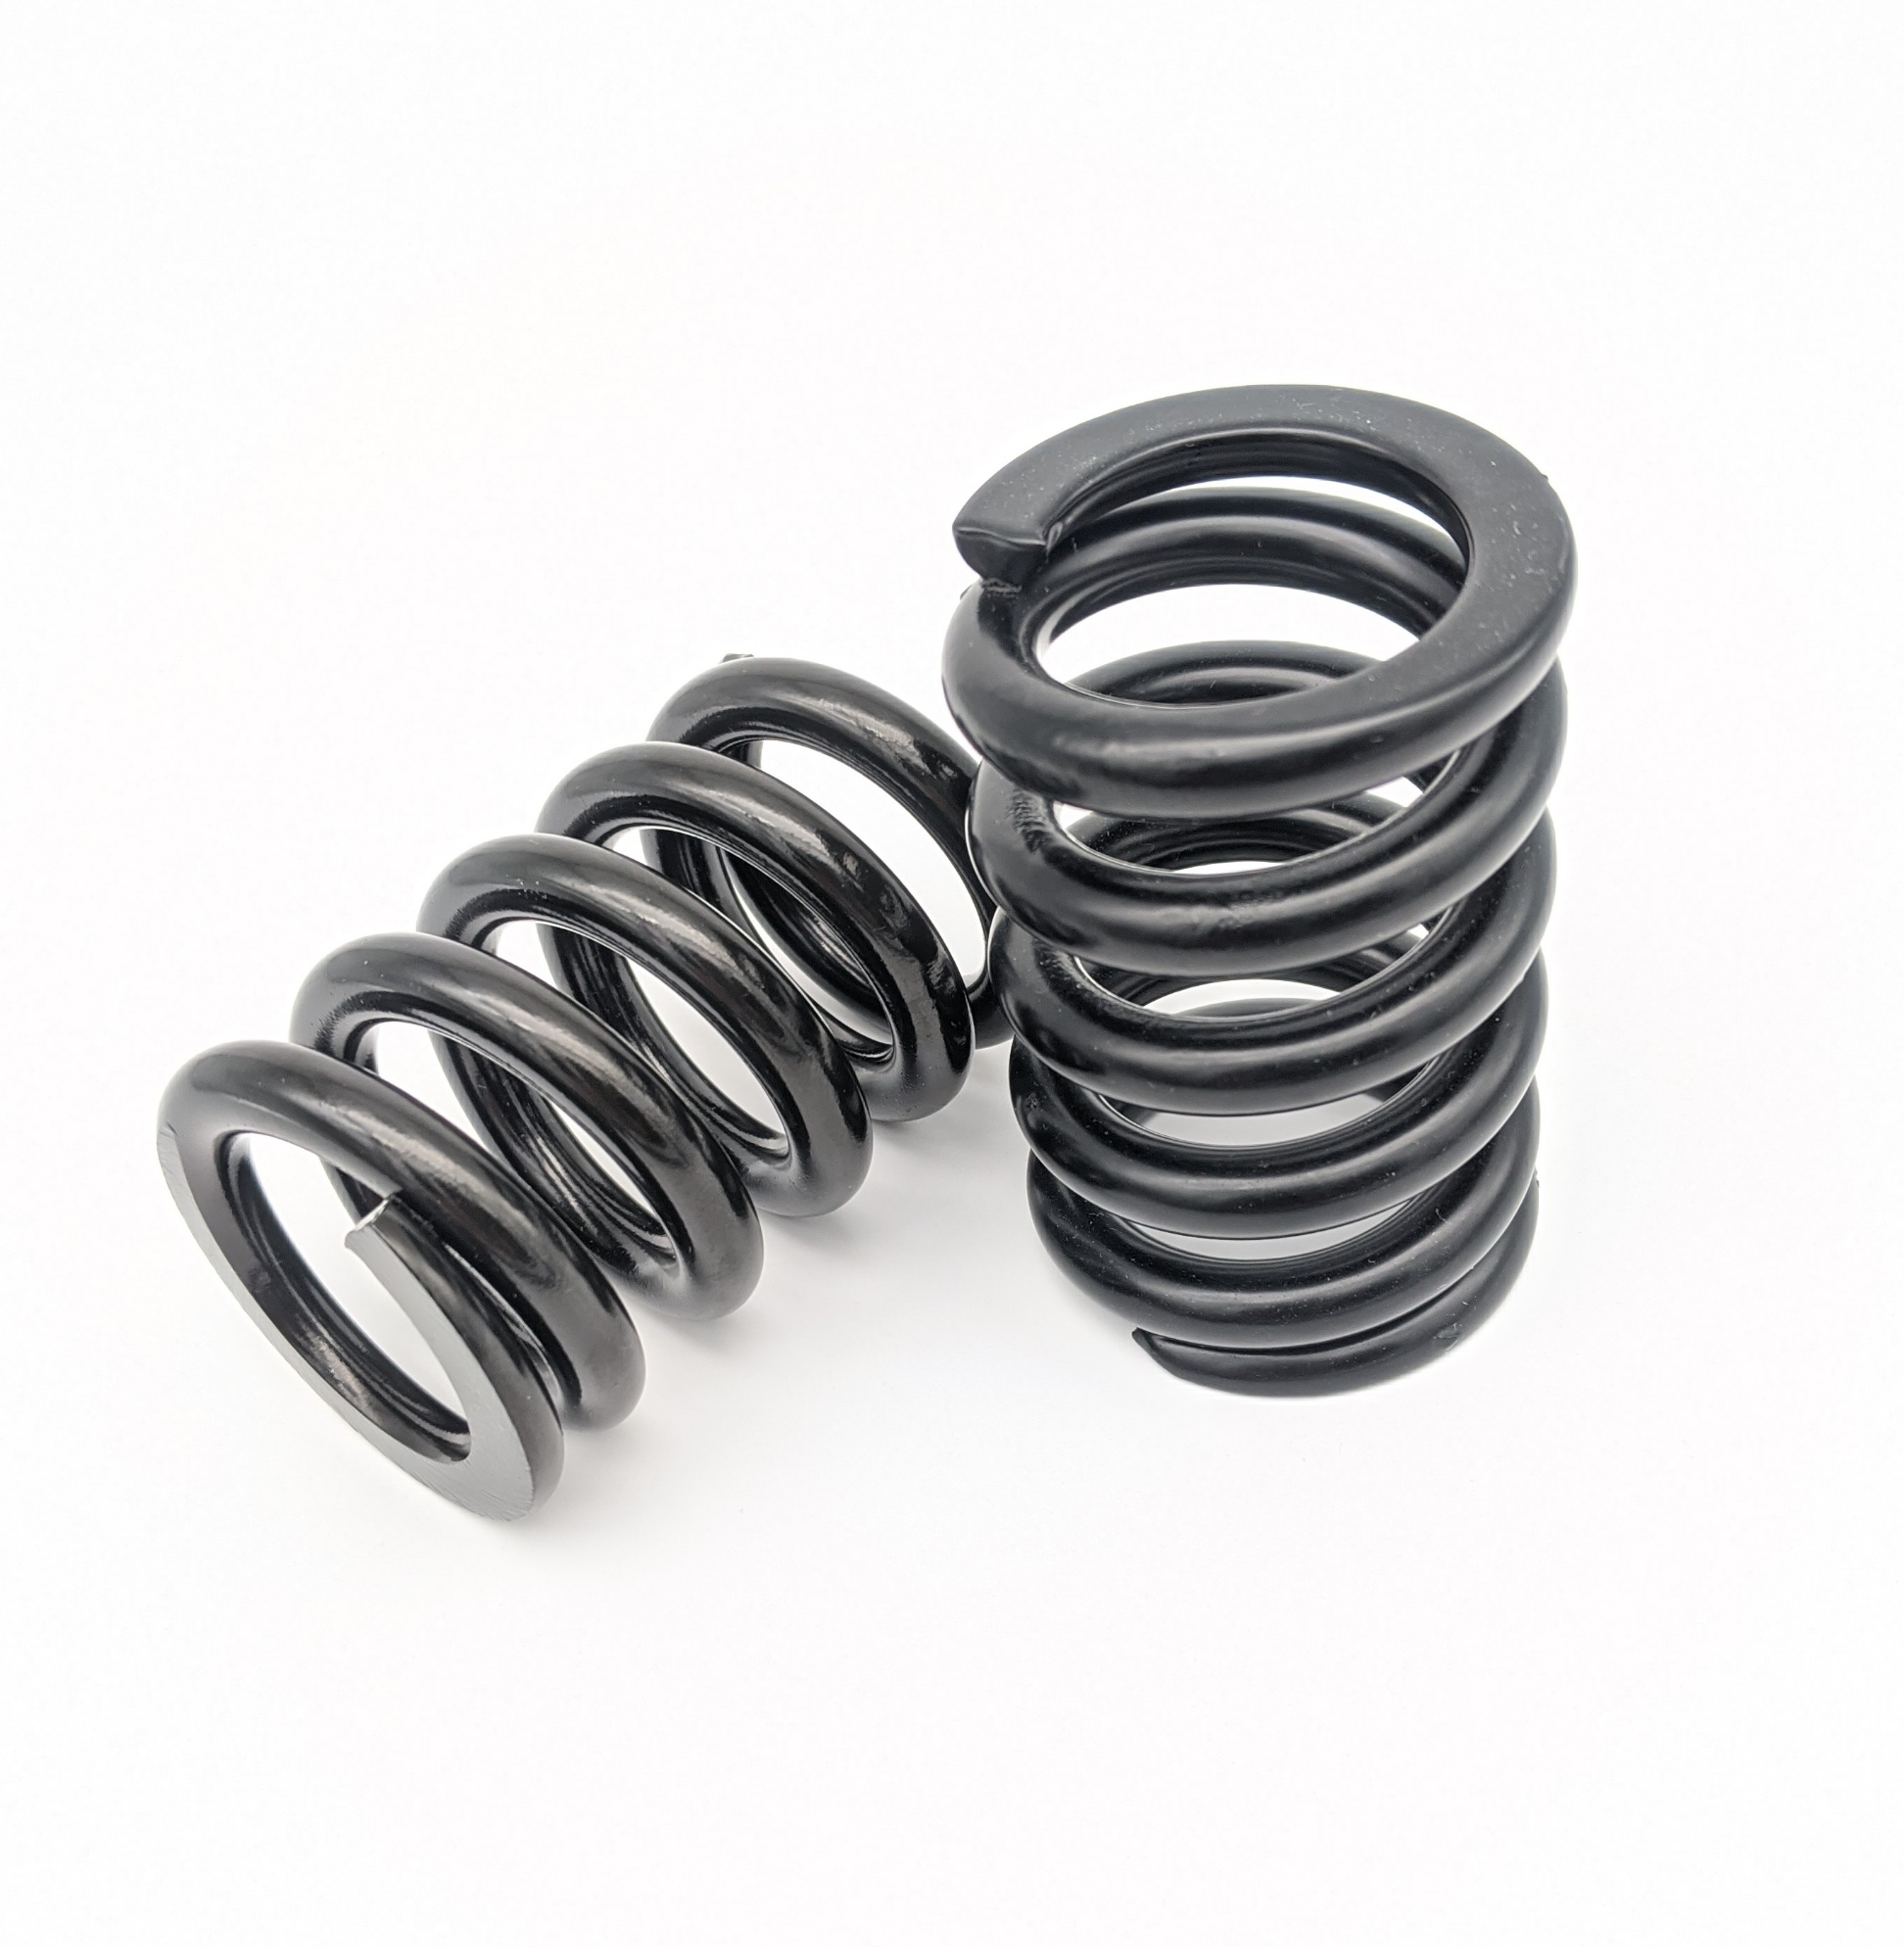 Two custom coil springs with e-coat finishing in black